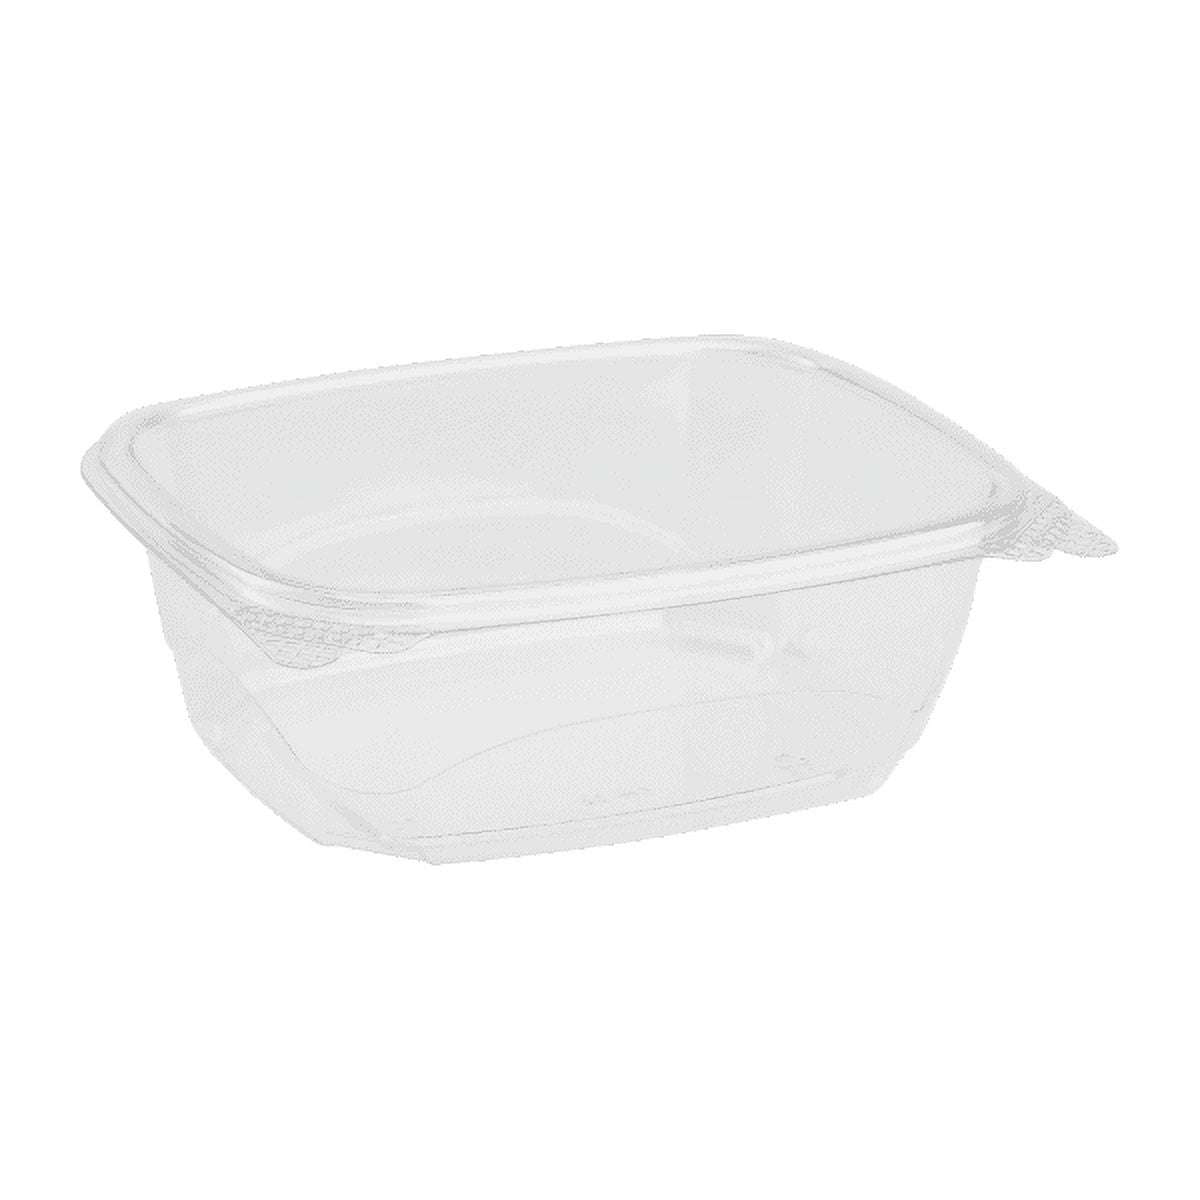 Karat 32 oz Durable Recyclable Polypropylene Round Deli Containers (Pack of 500)